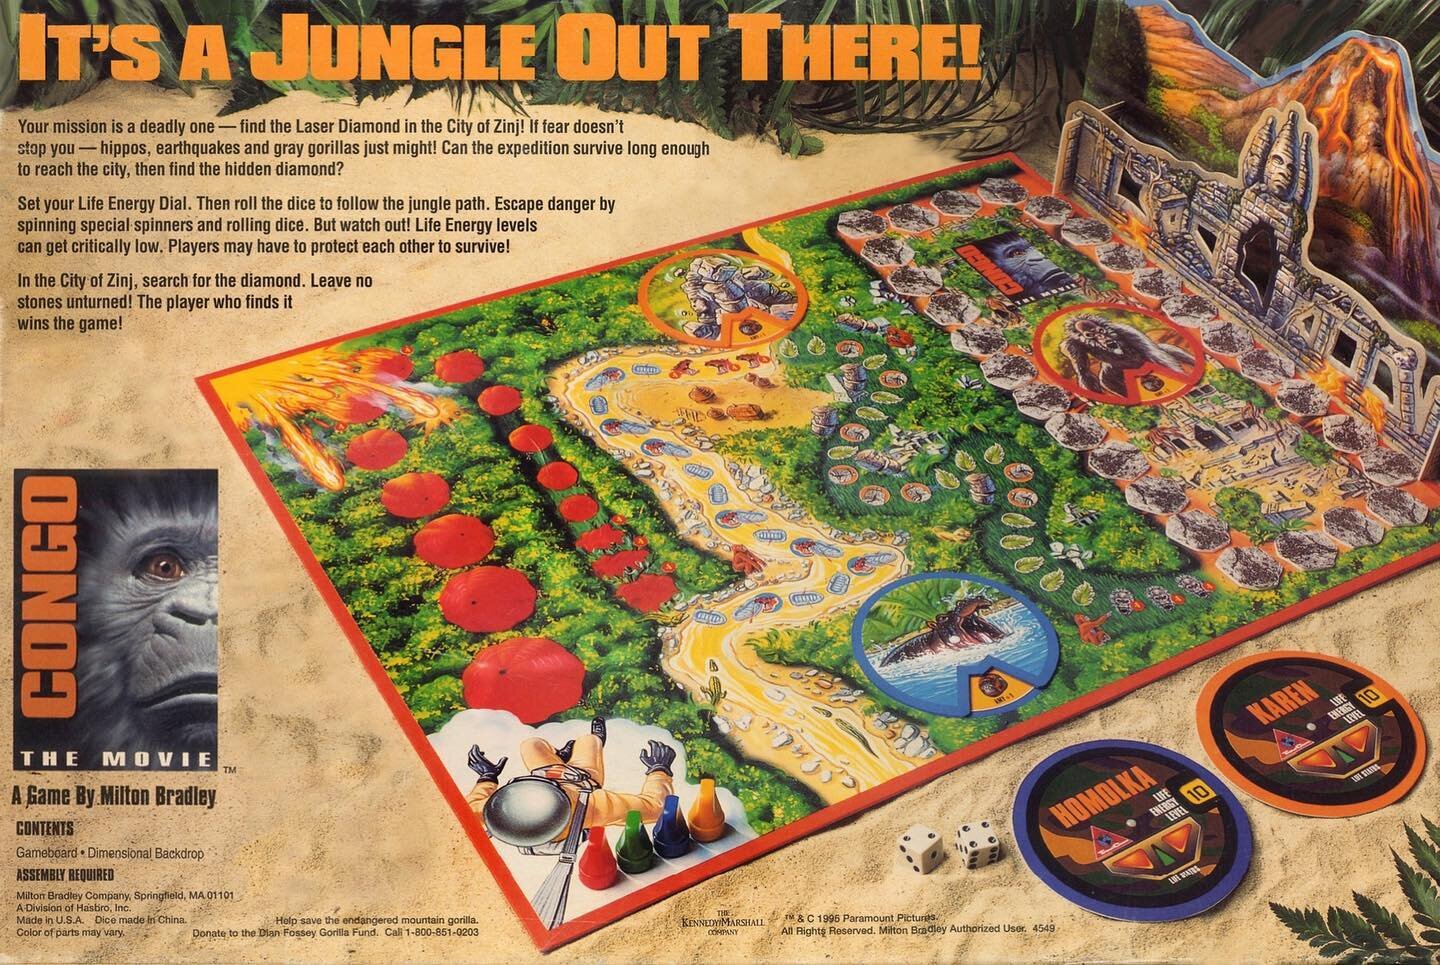 Remember all that artwork on the actual game board of your favorite board games? Someone had to do it. Here's one of the many Ciccarelli created over the years&mdash;a fairly intricate piece of art done for the Milton Bradley board game based on the 